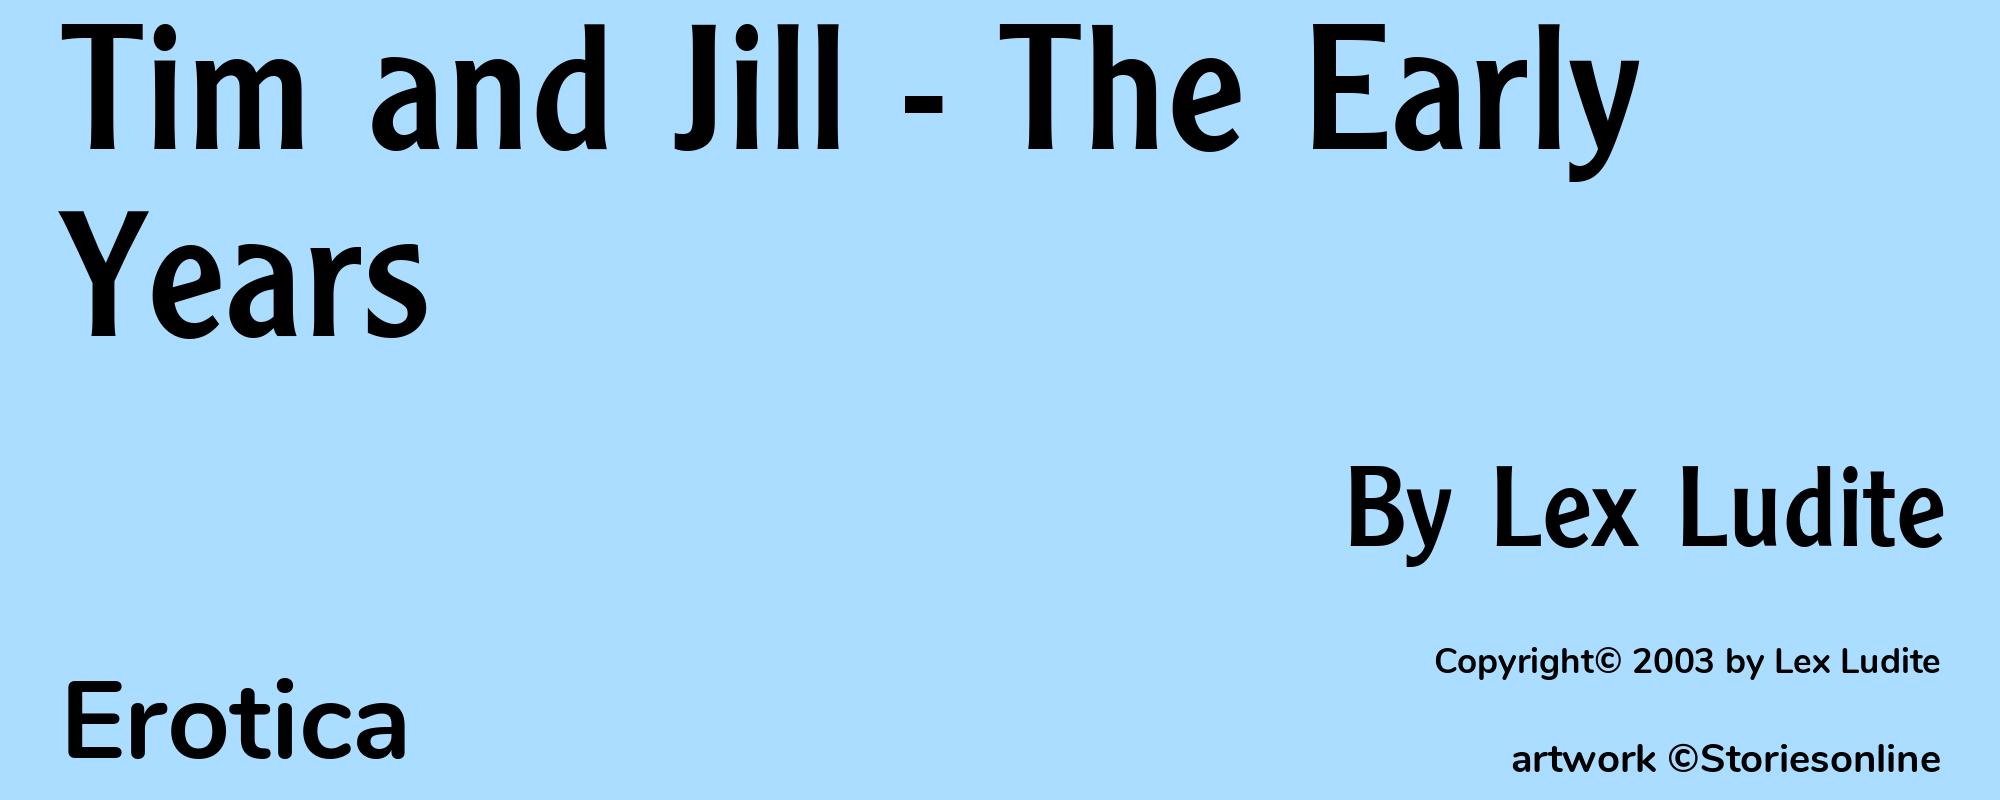 Tim and Jill - The Early Years - Cover